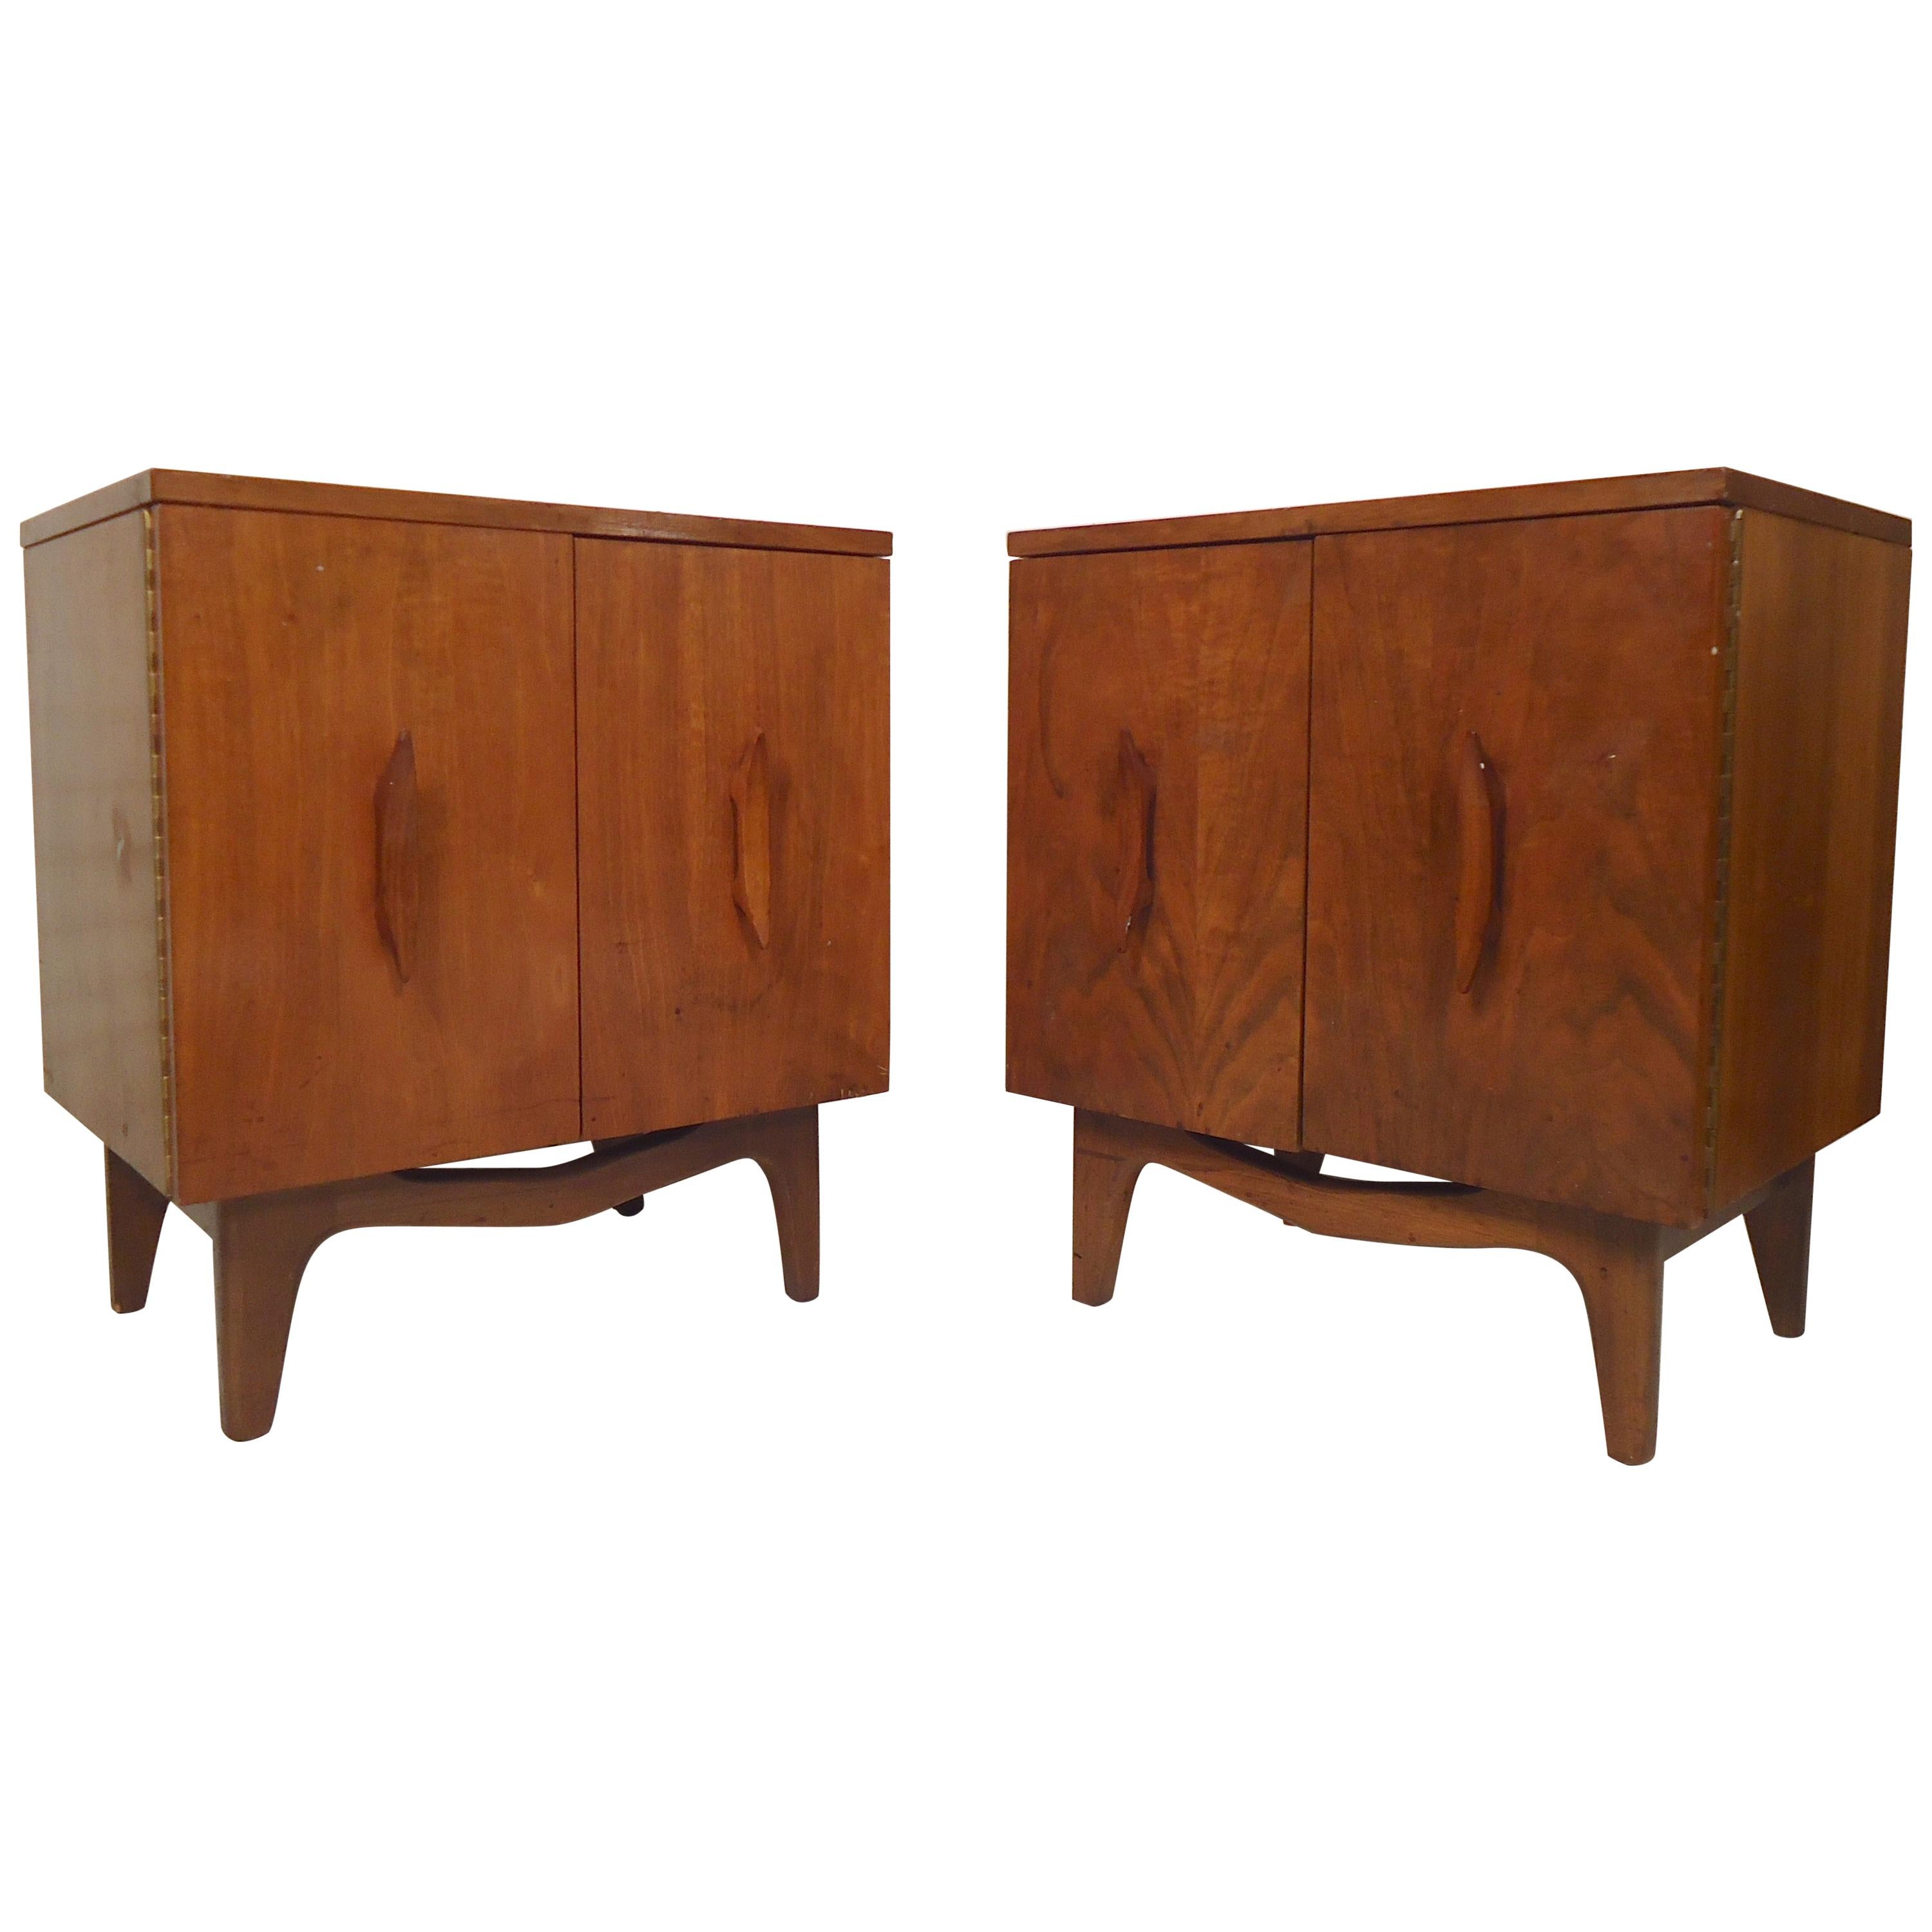 Mid-Century Modern Nightstands with Sculpted Handles